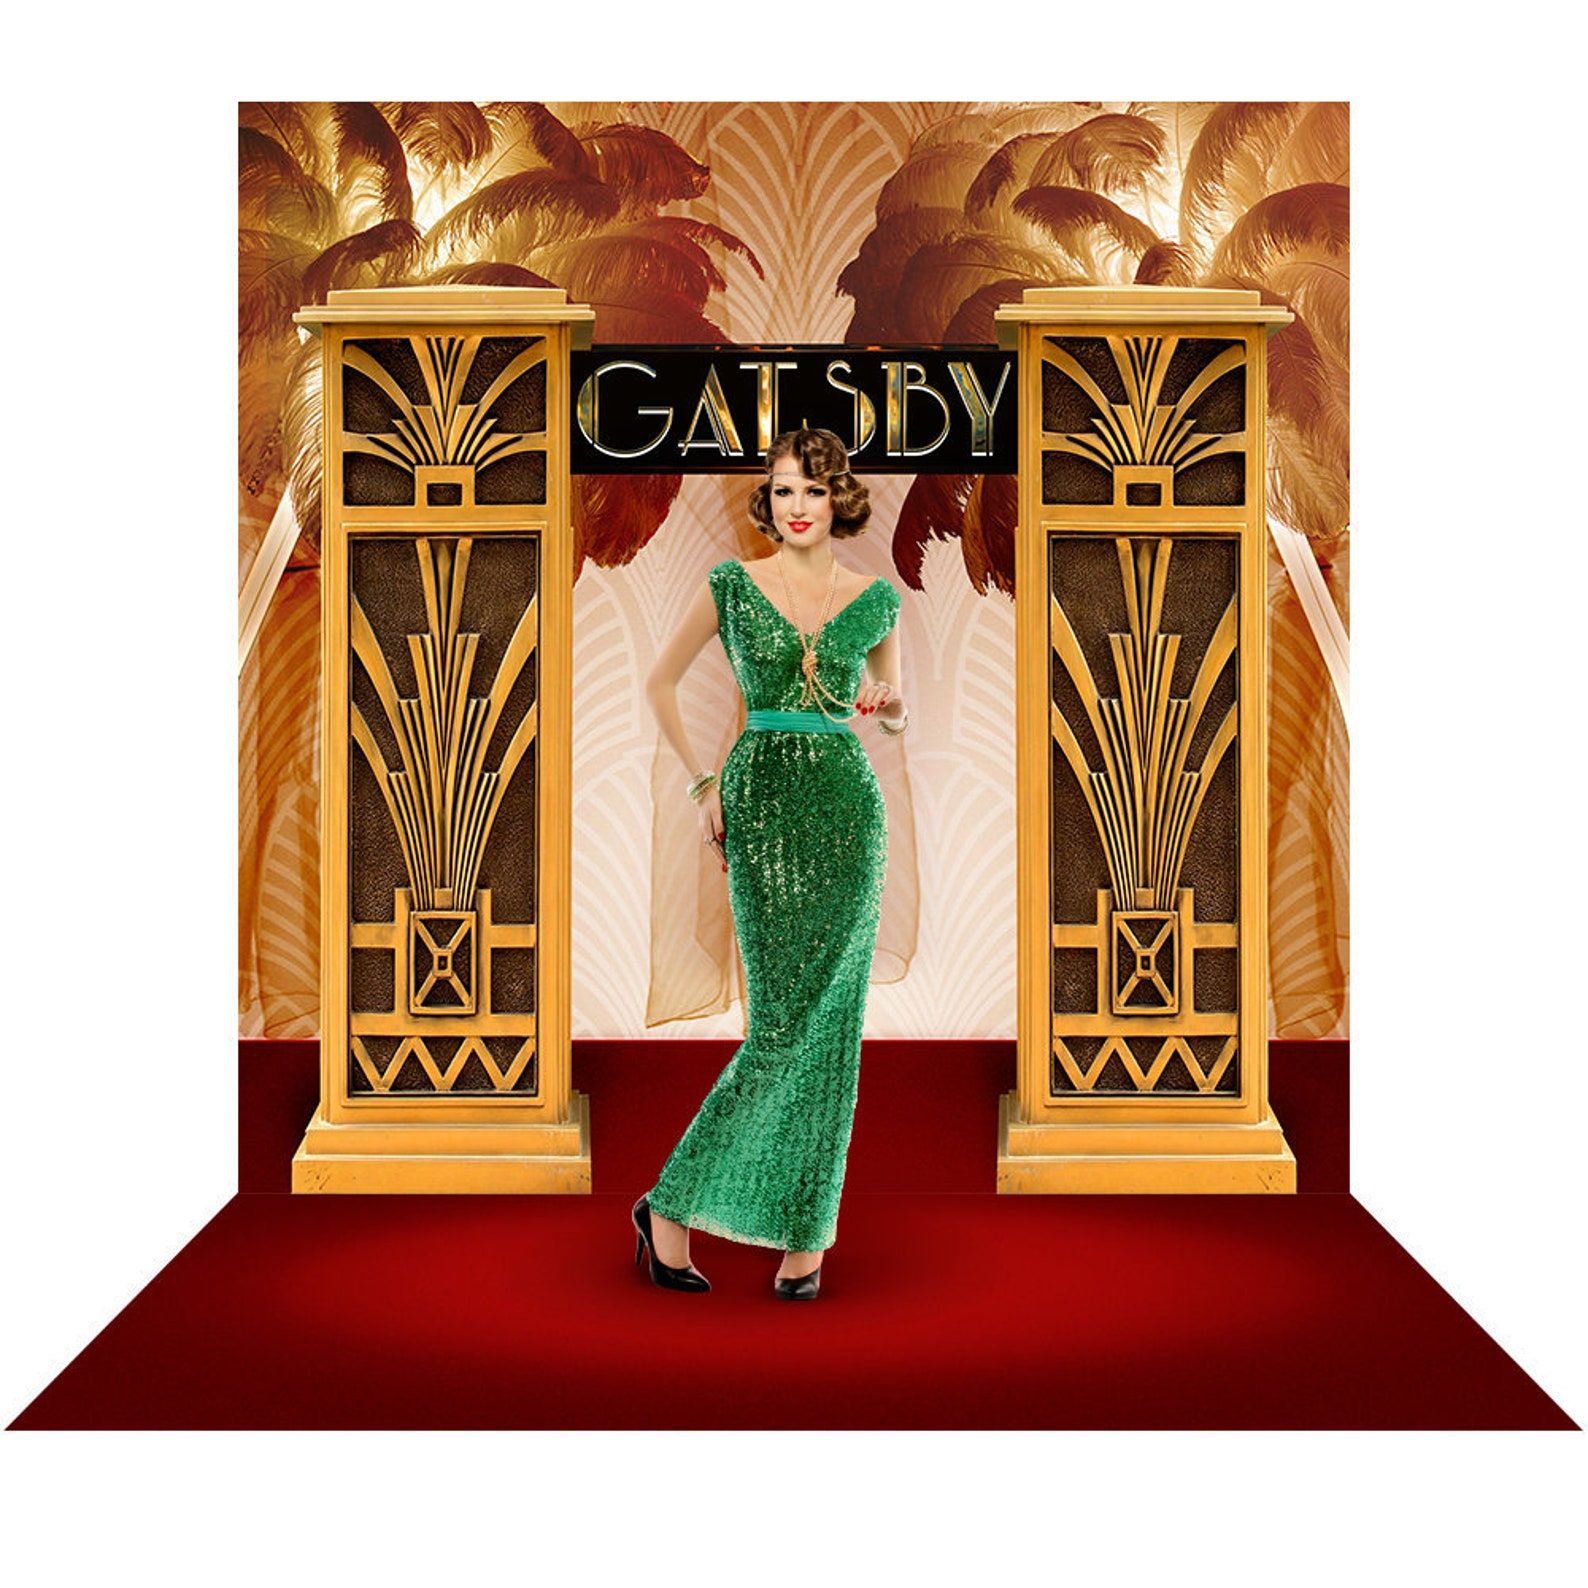 Great Gatsby 1920s Gold Prom Party Decor Photo Backdrop